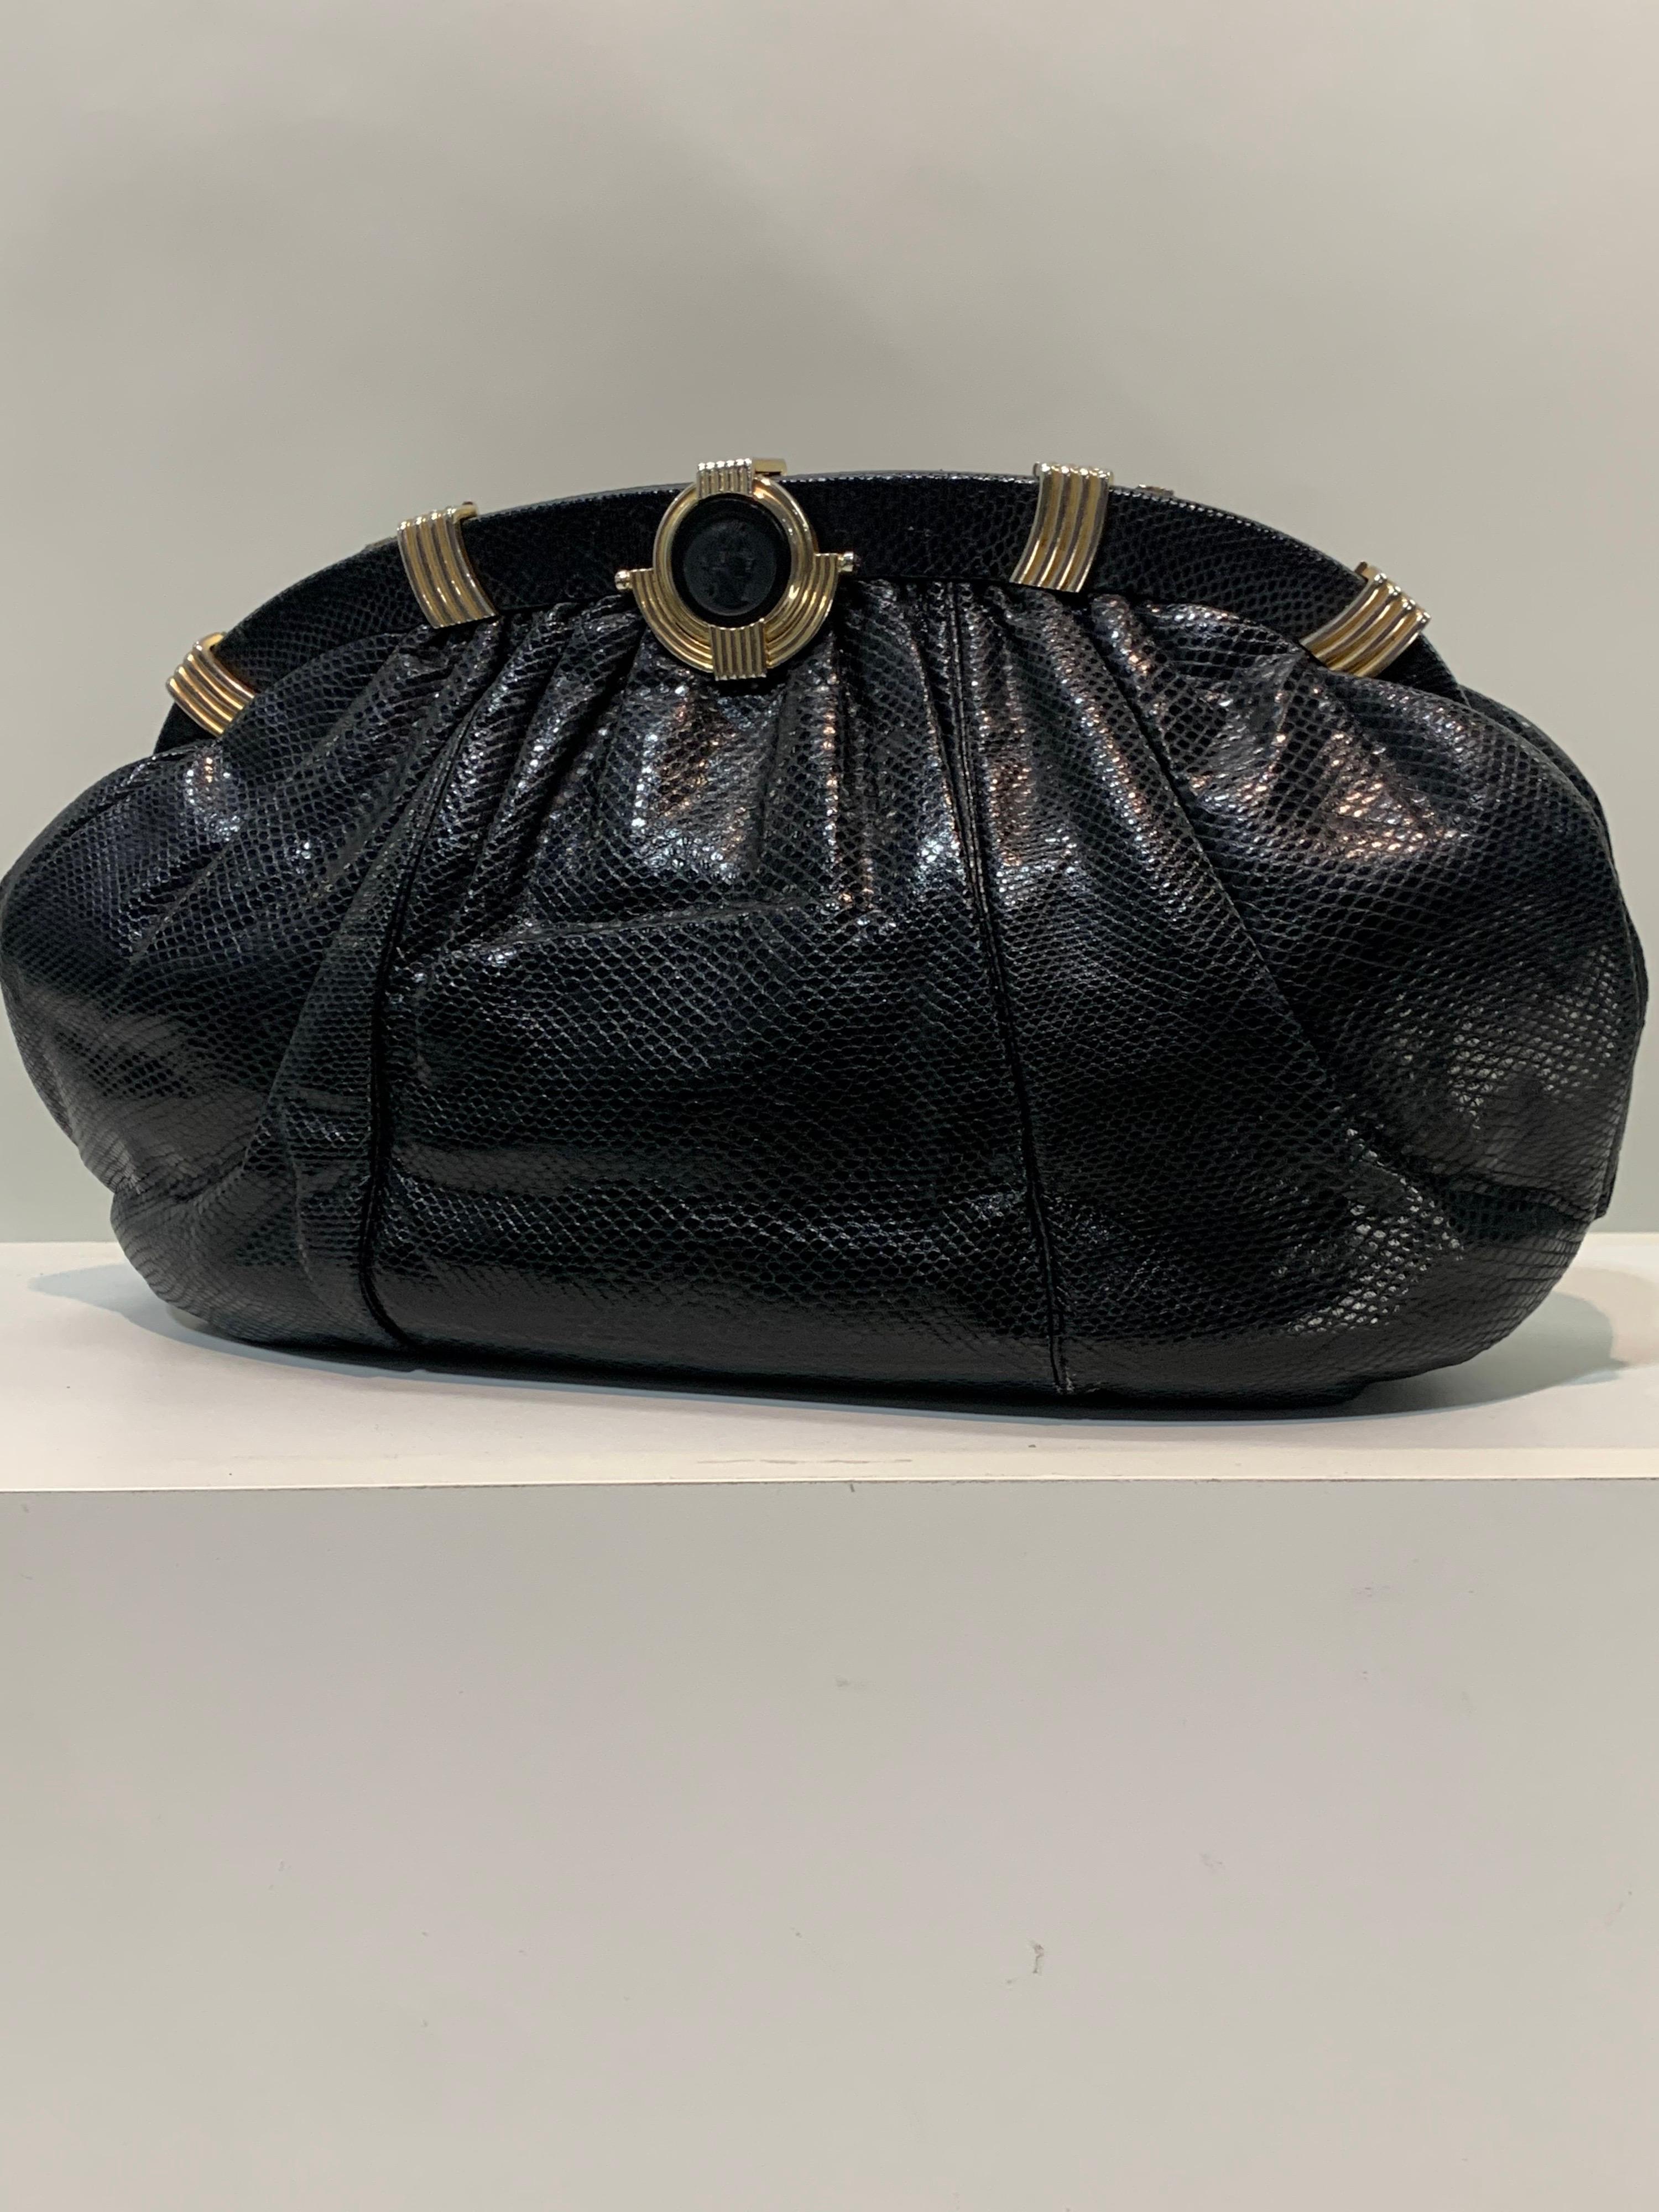 1980s Judith Leiber Black Lizard Convertible Clutch Handbag w/ Obsidian Cameo In Good Condition For Sale In Gresham, OR